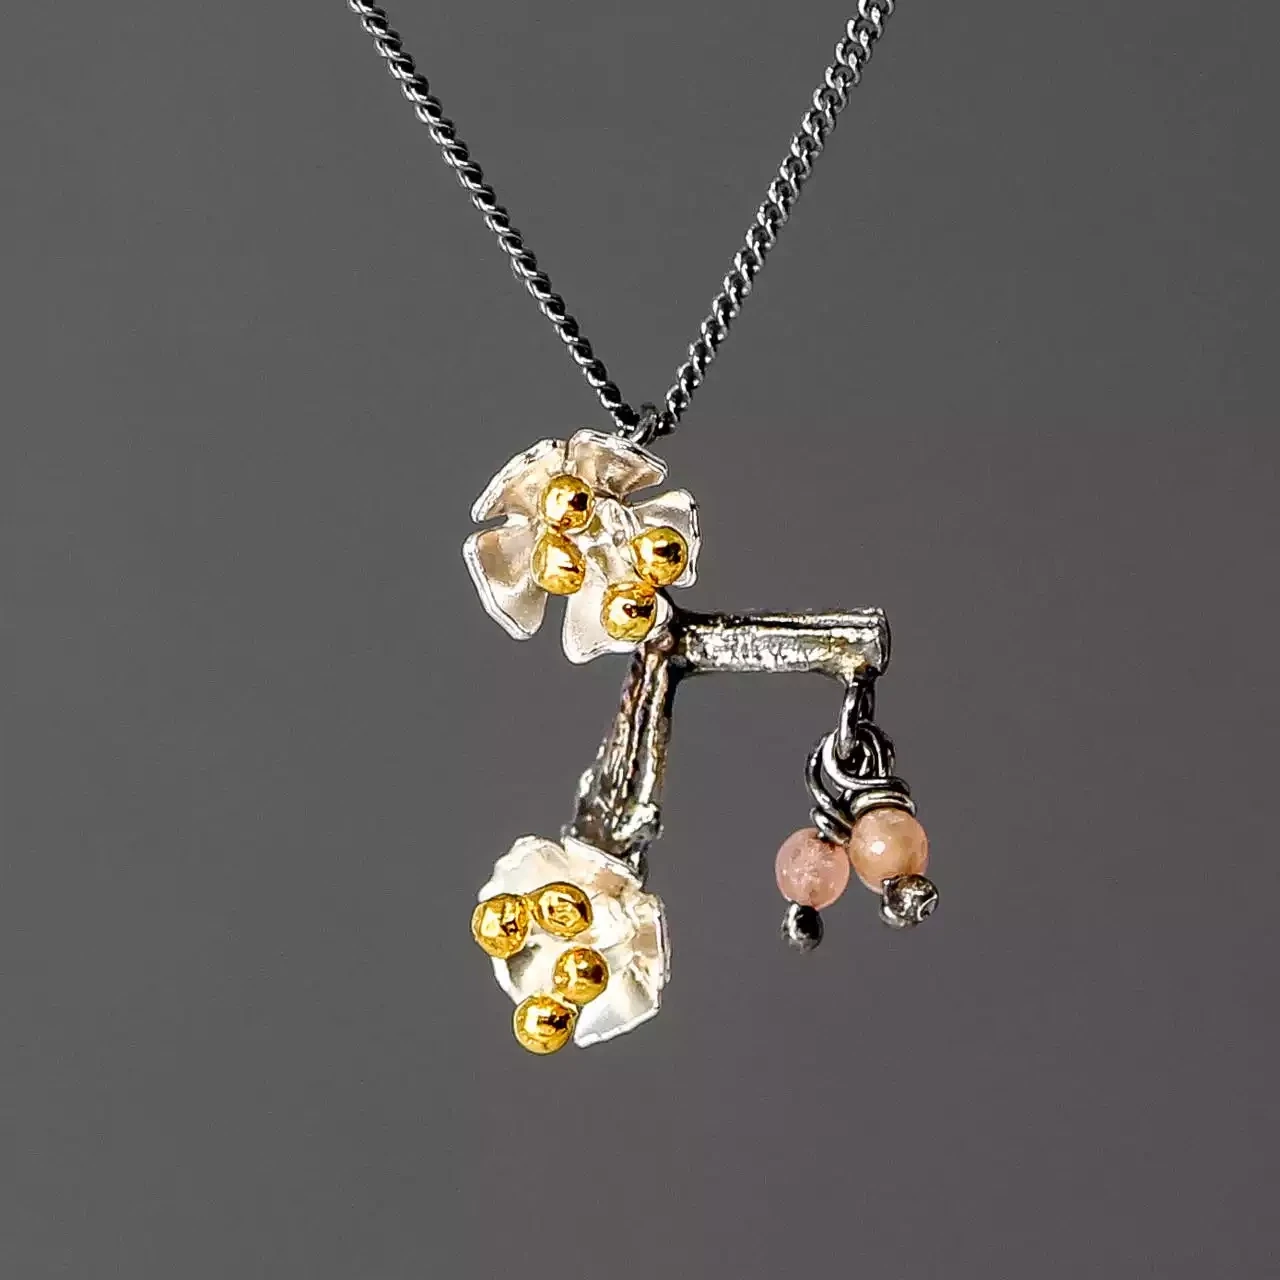 Almond Blossom Silver and Gold Plated Necklace by Amanda Coleman